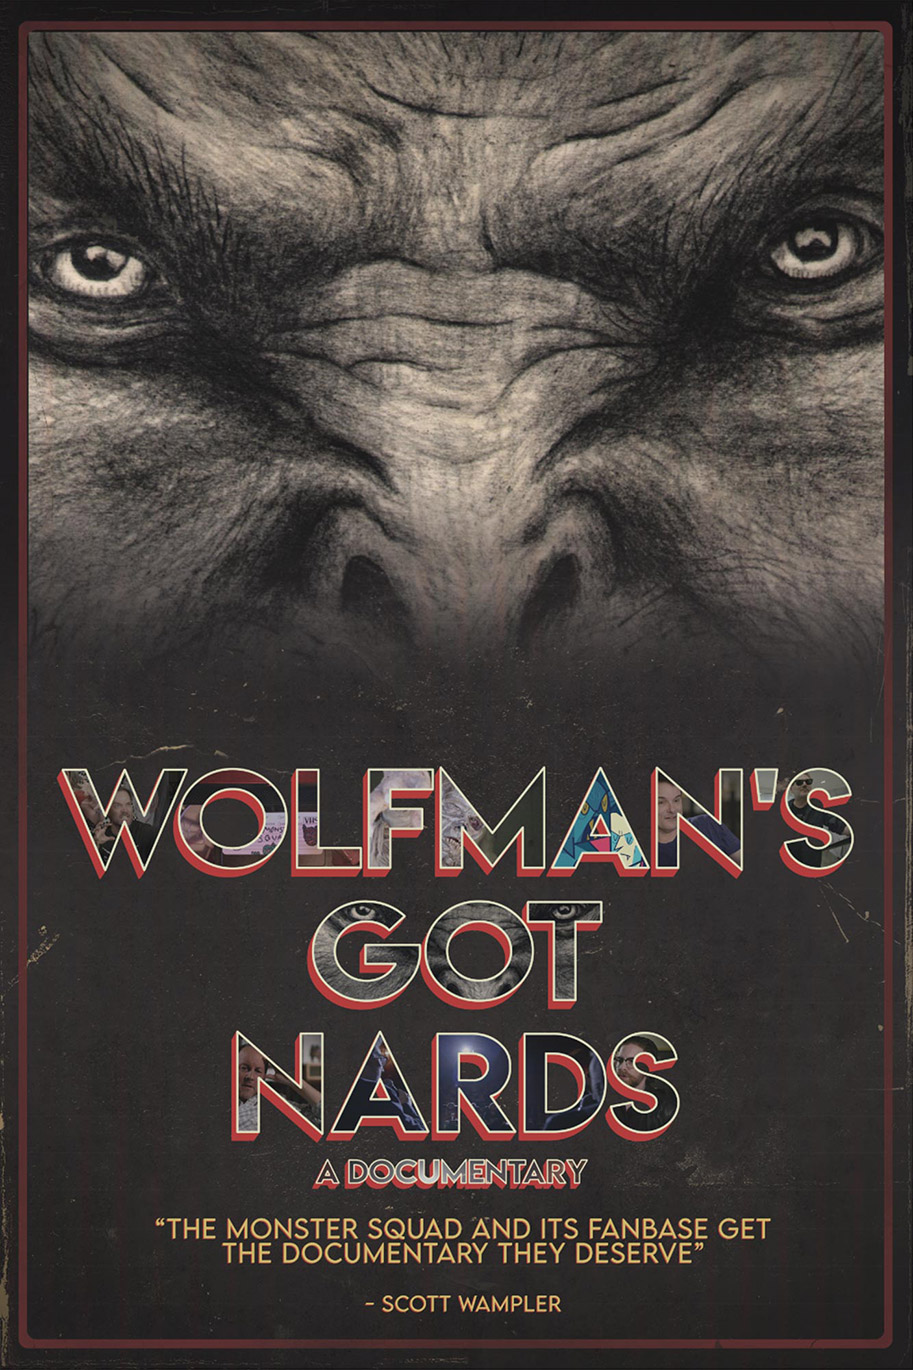 The Monster Squad, Wolman's Got Nards, documentary